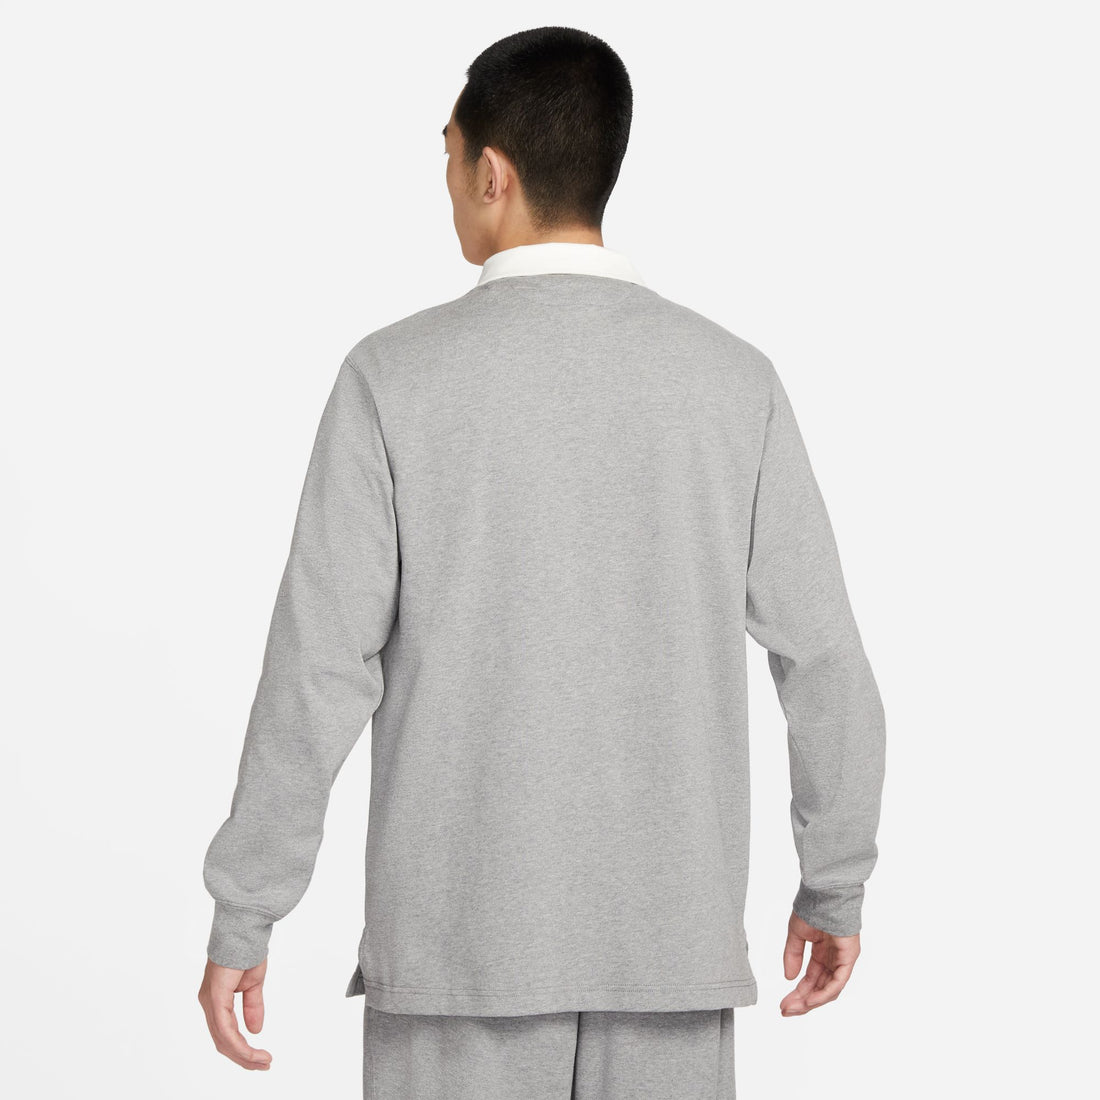 Nike Sportswear Rugby Top (Carbon Heather/Sail/Flat Pewter)